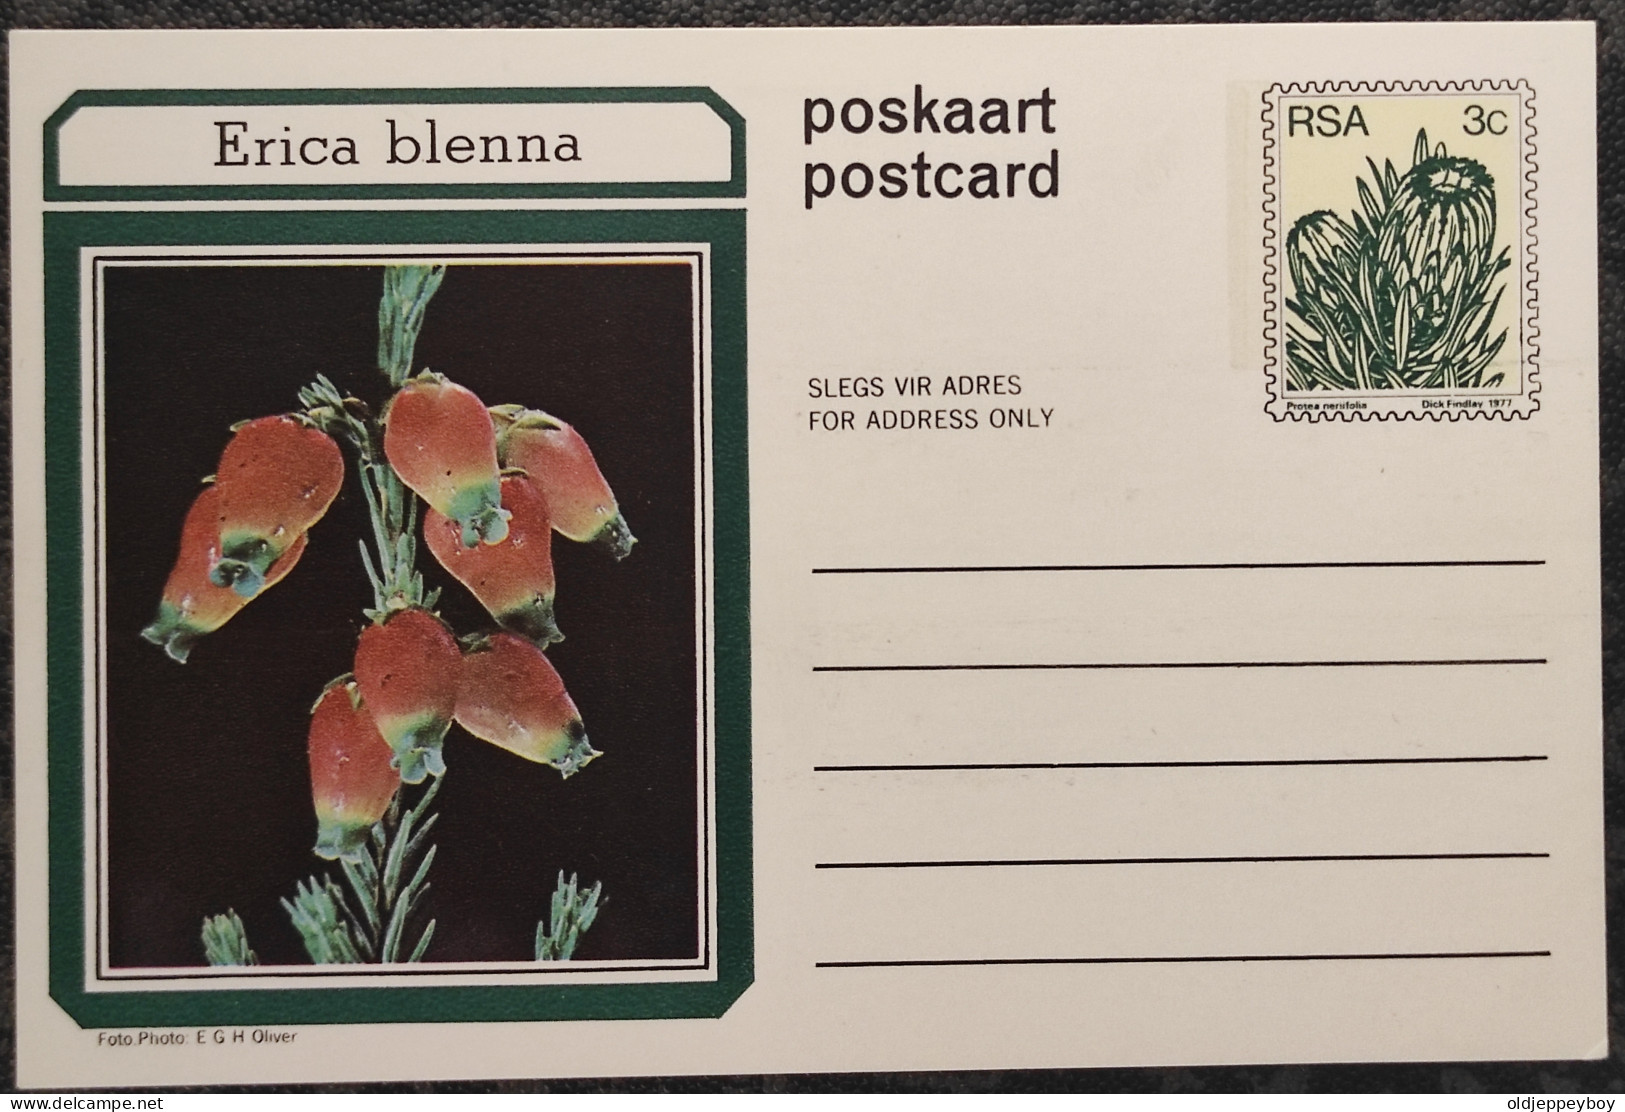 3c SOUTH AFRICA Postal STATIONERY CARD Illus ERICA BLENNA FLOWER Cover Stamps Flowers Rsa - Storia Postale